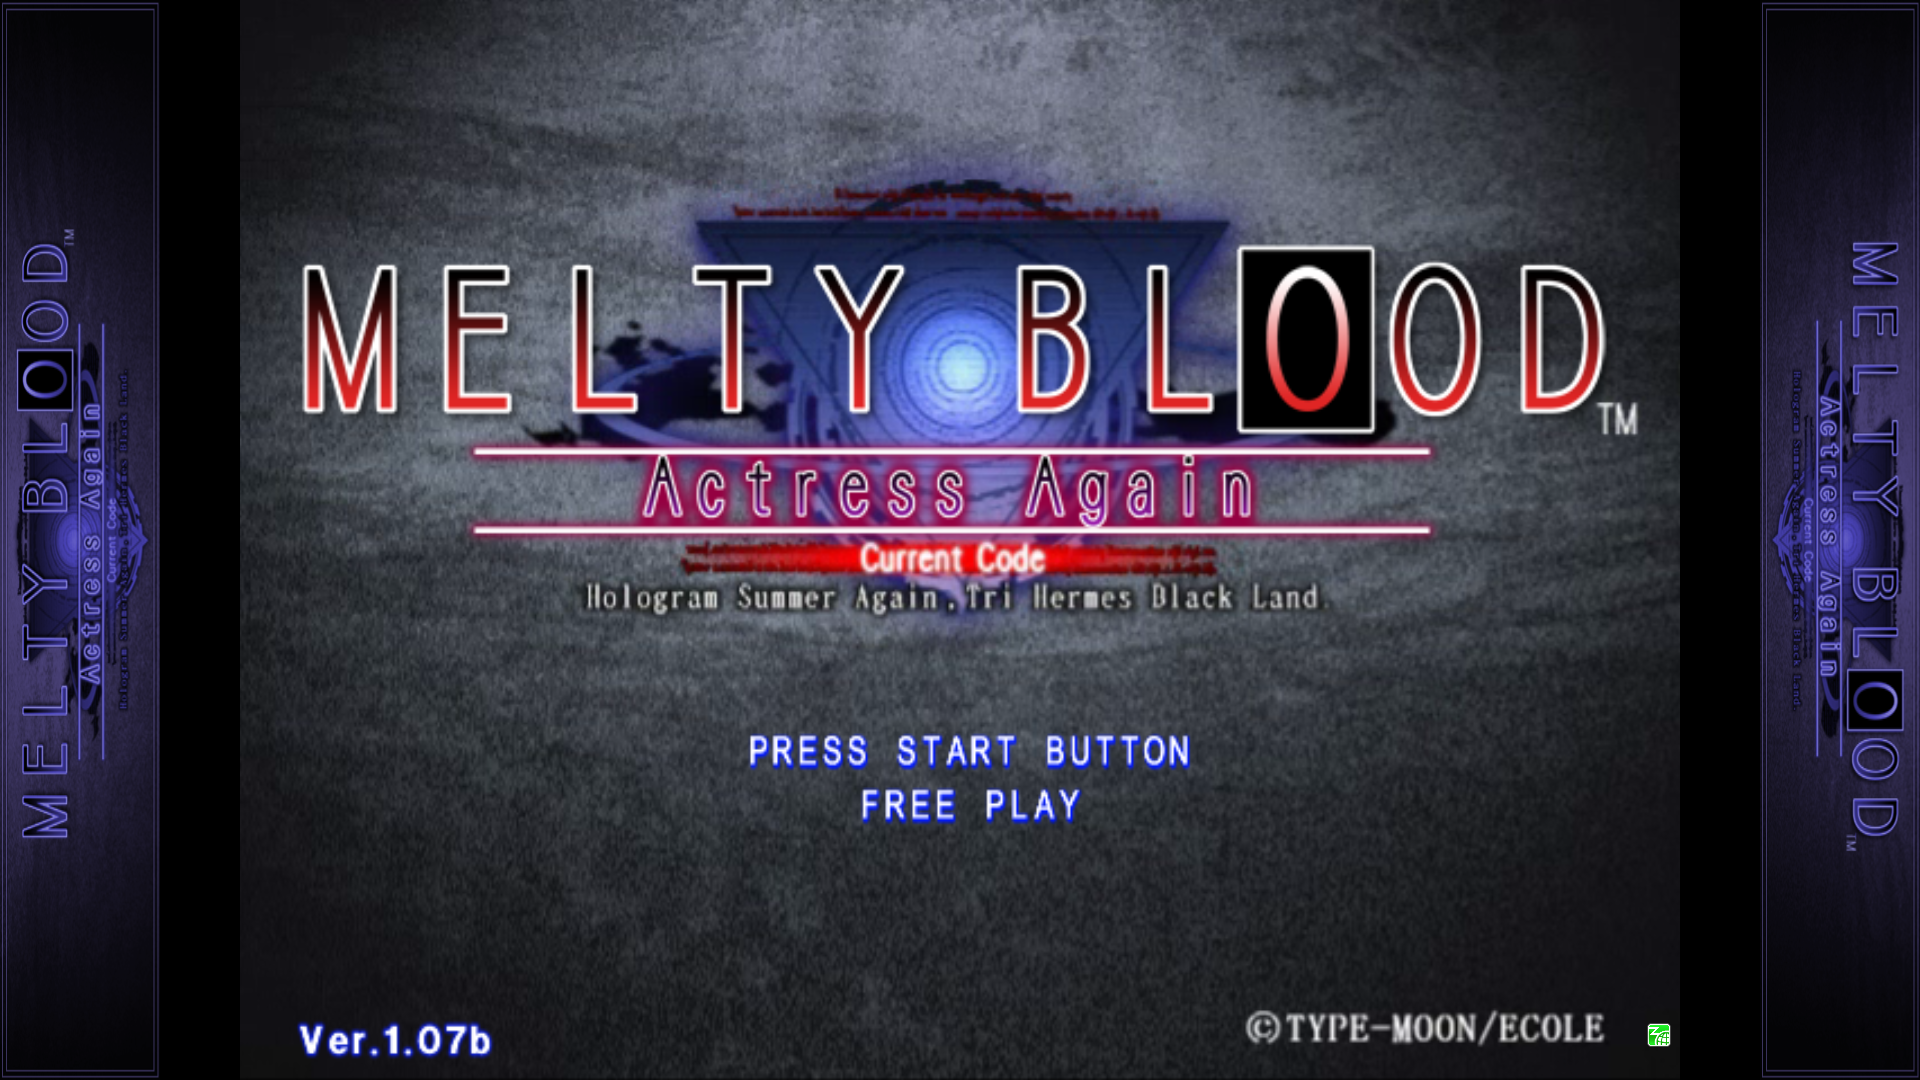 Melty Blood: Actress Again - Current Code (APM 2) | JConfig 